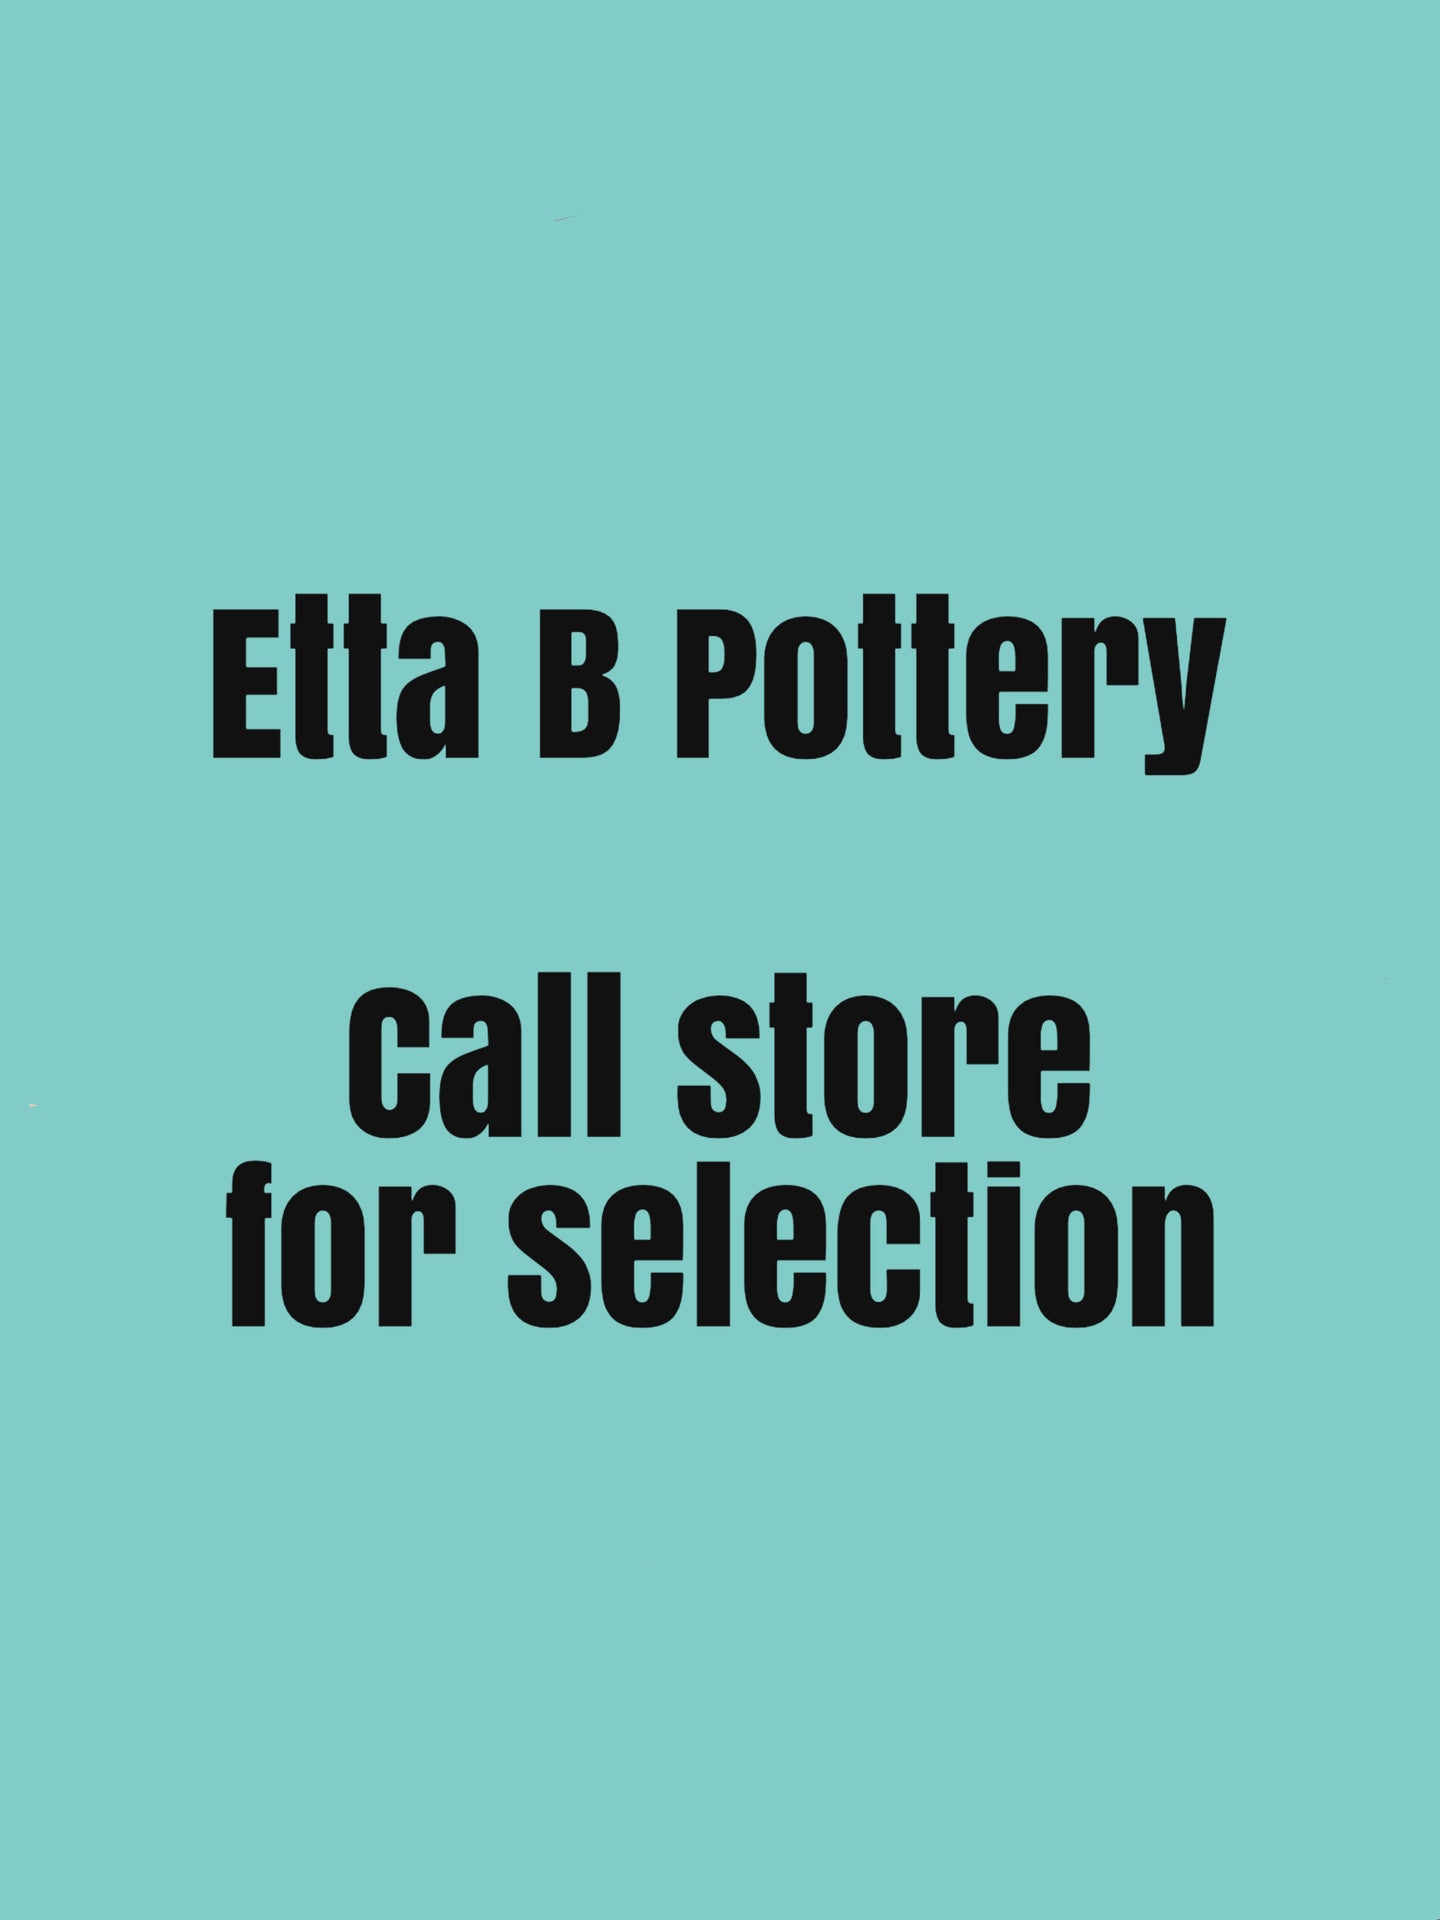 Etta B Pottery - Call store to purchase